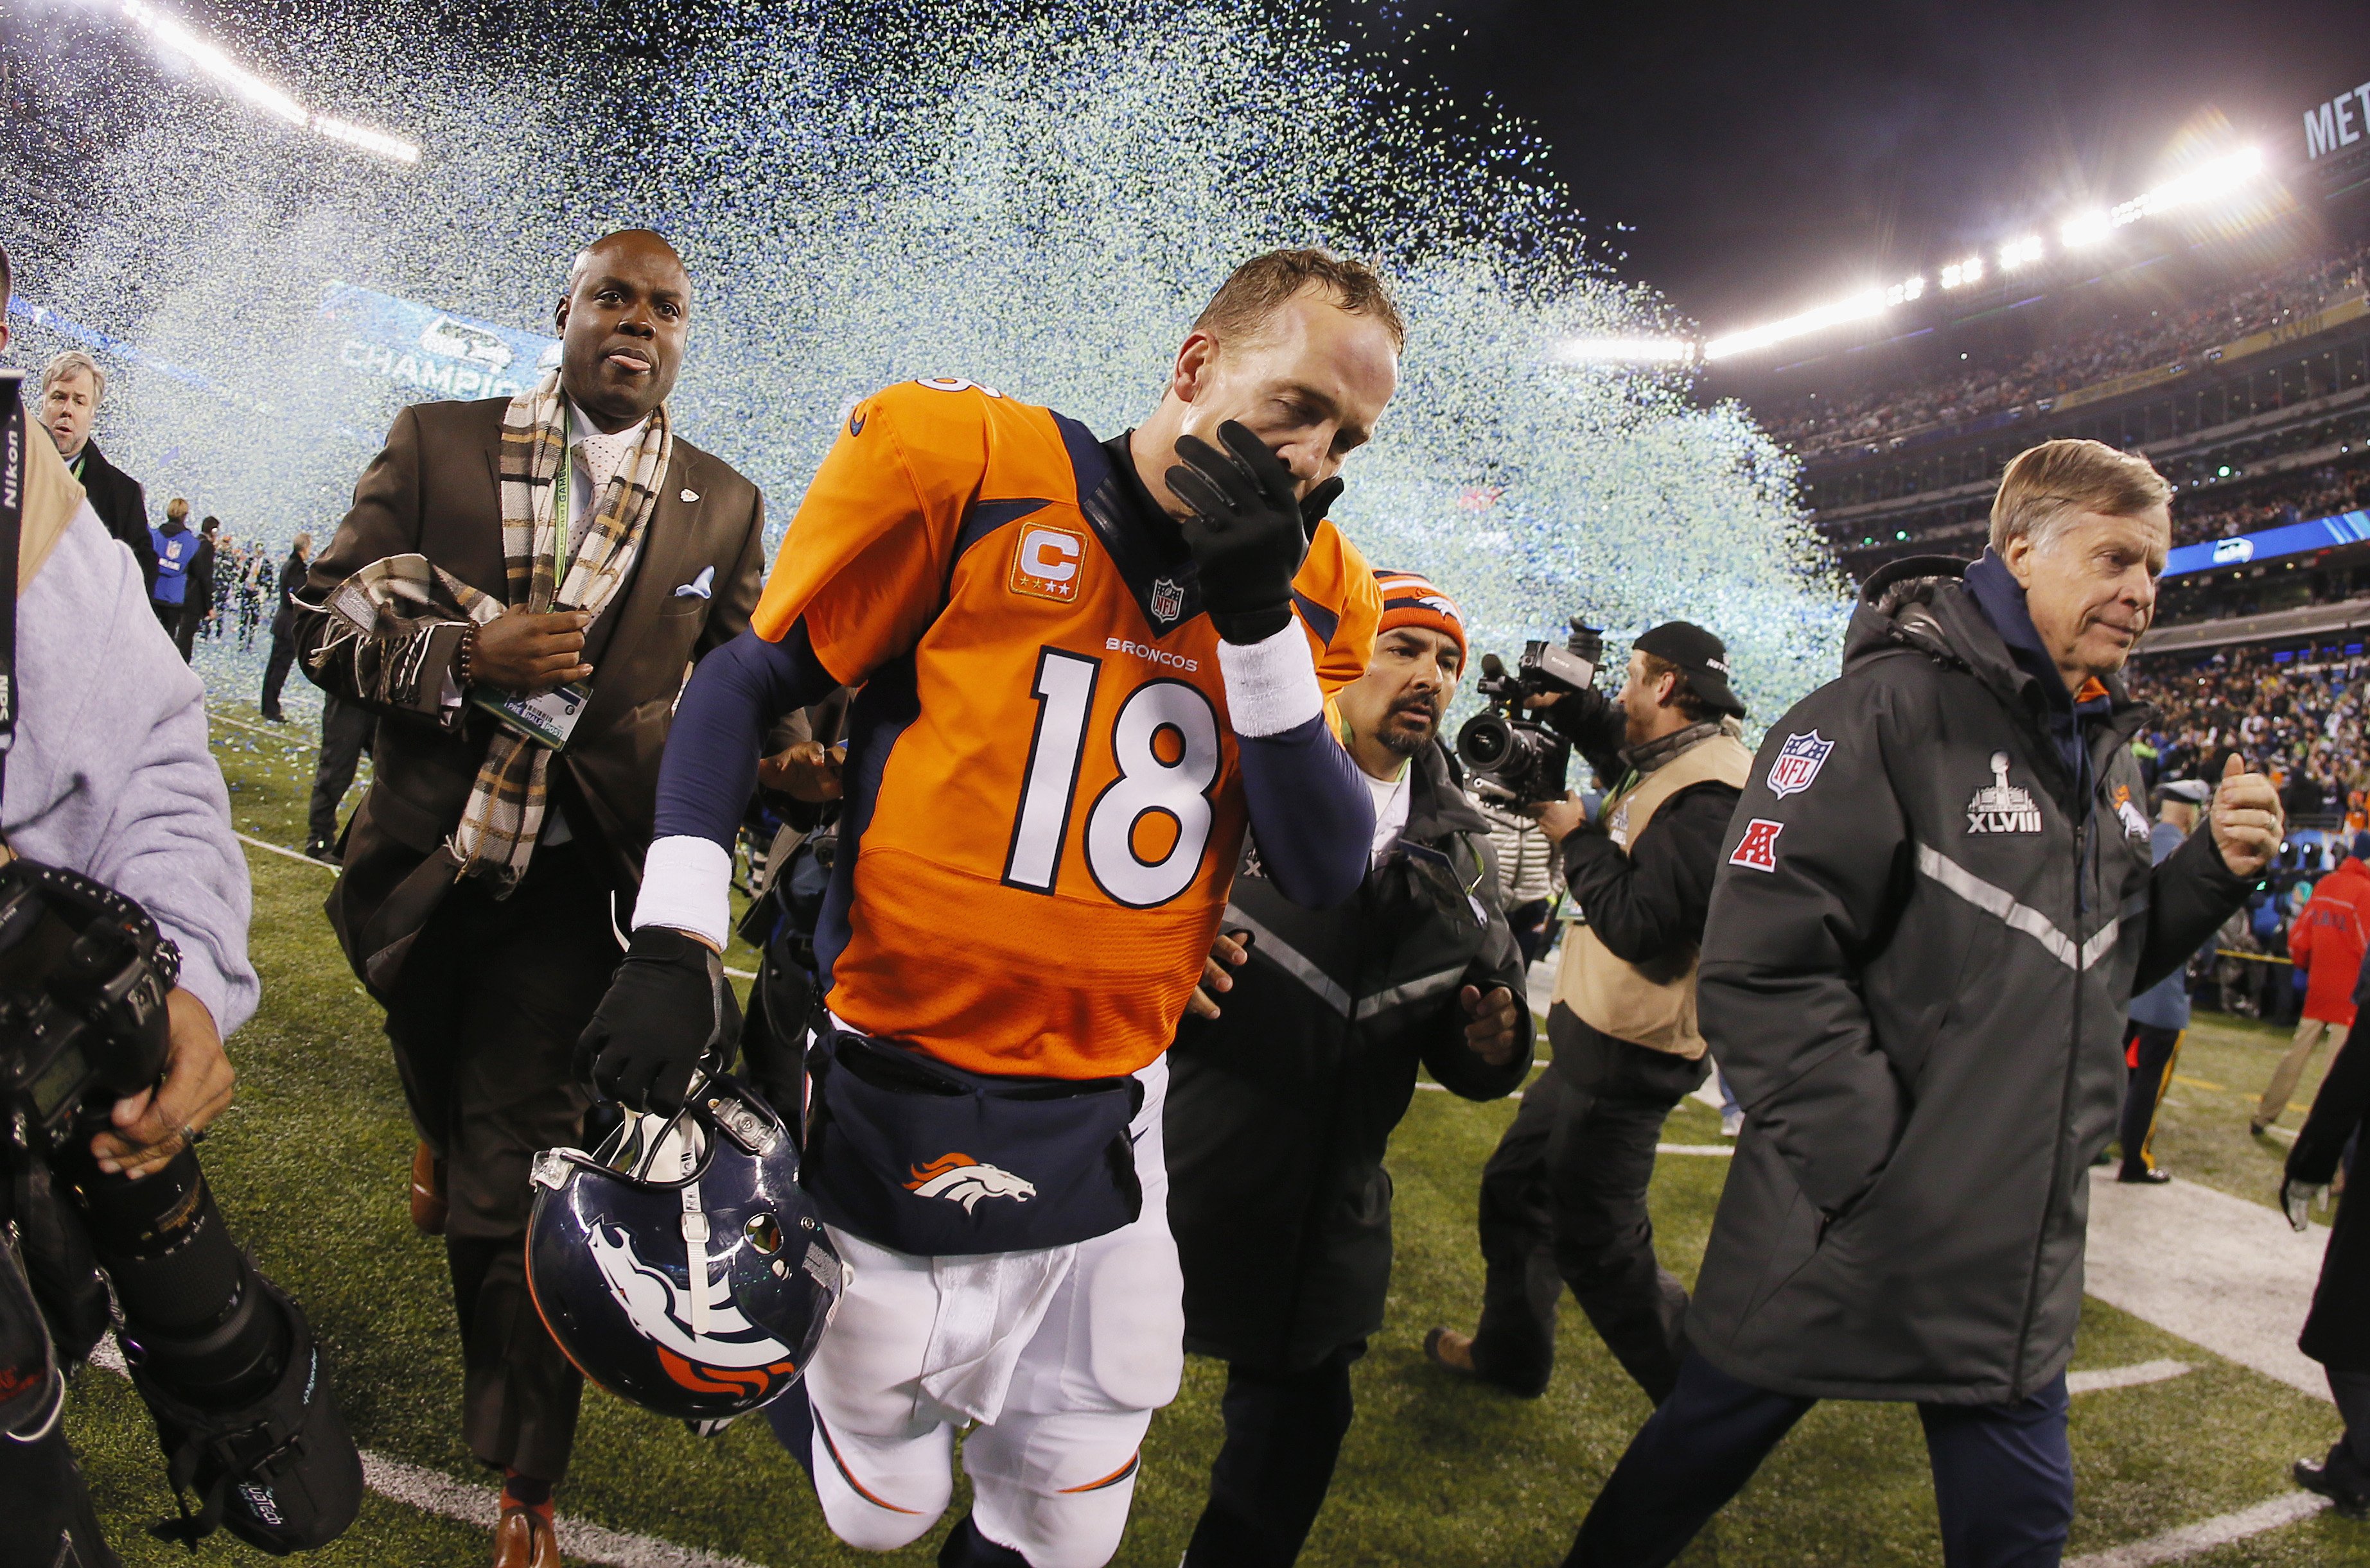 Quarterback Peyton Manning of the Denver Broncos reacts as he walks off the field after their 43-8 loss to the Seattle Seahawks during Super Bowl XLVIII.